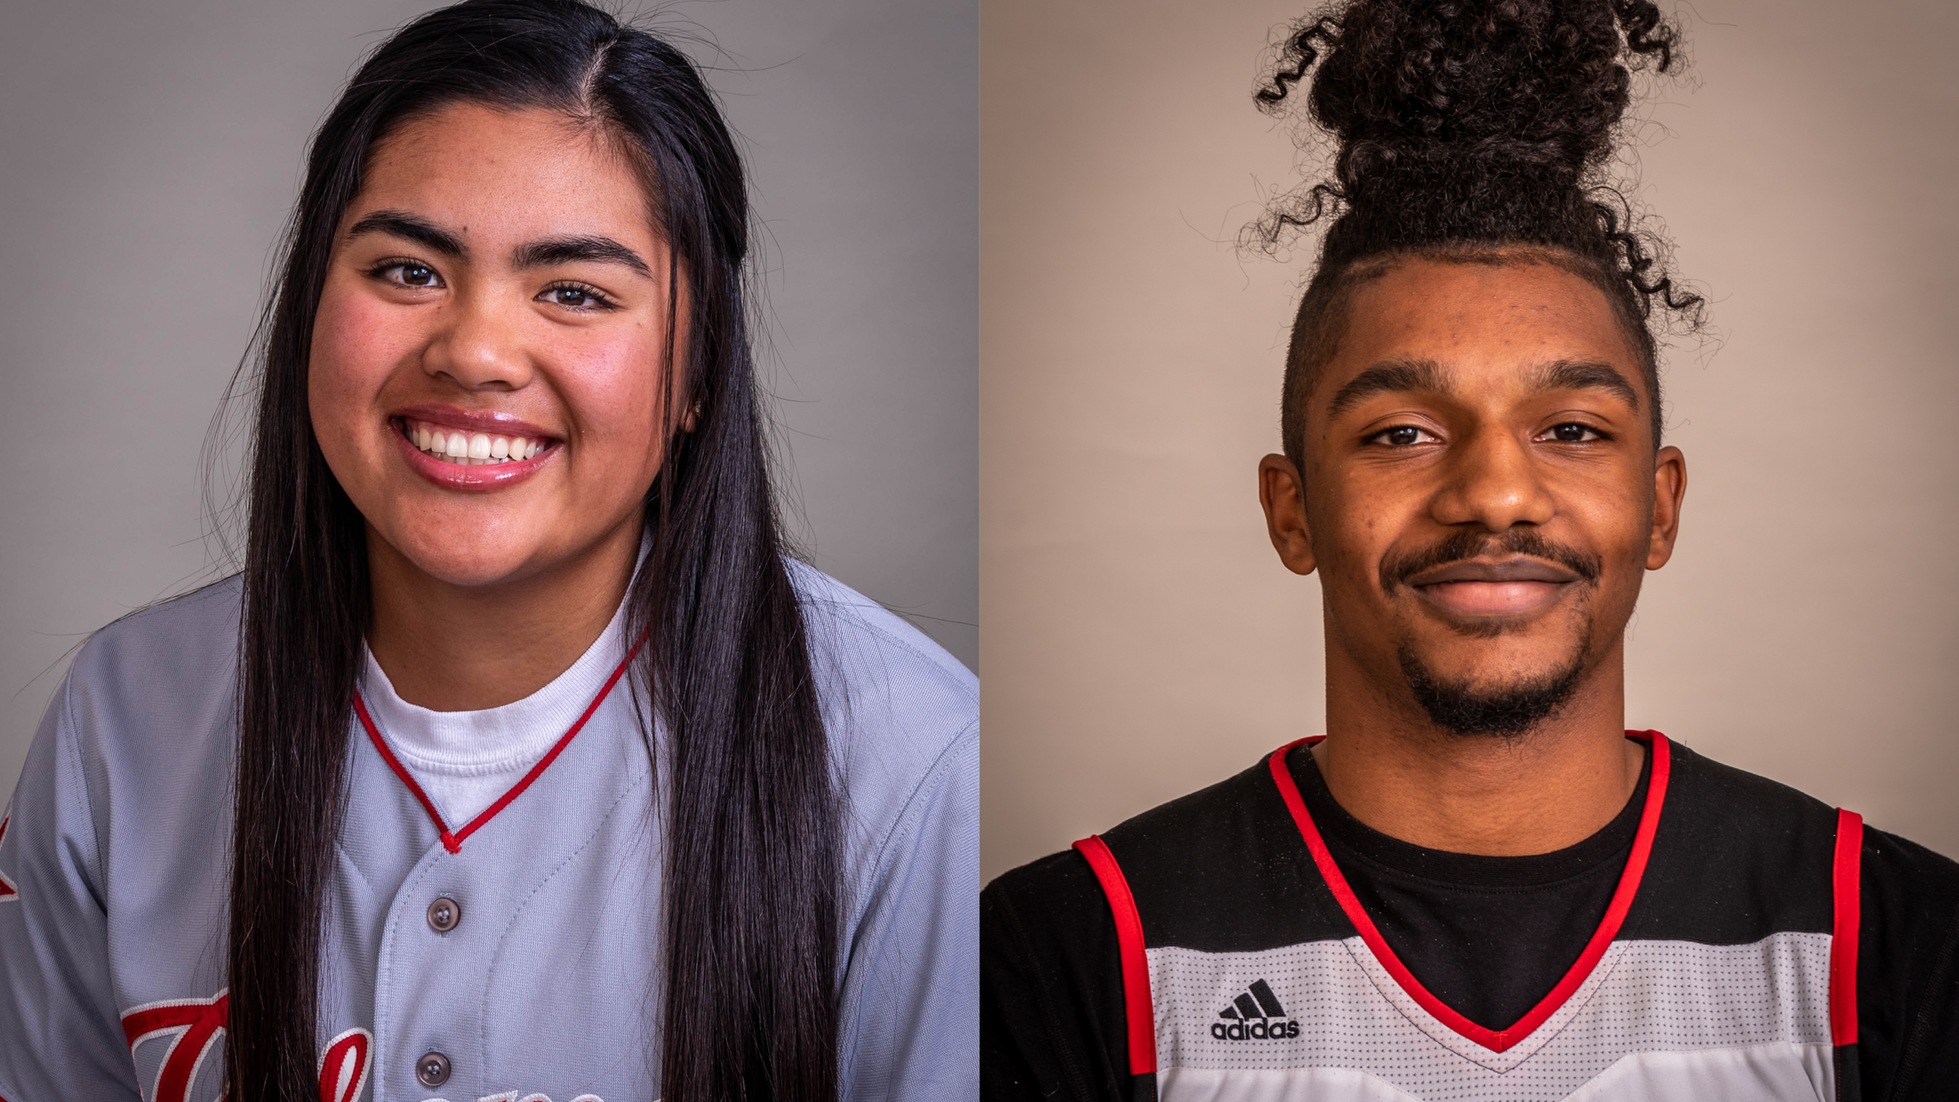 Domingo earns PCAC Athlete-of-the-Month honor; WIlson, honorable mention